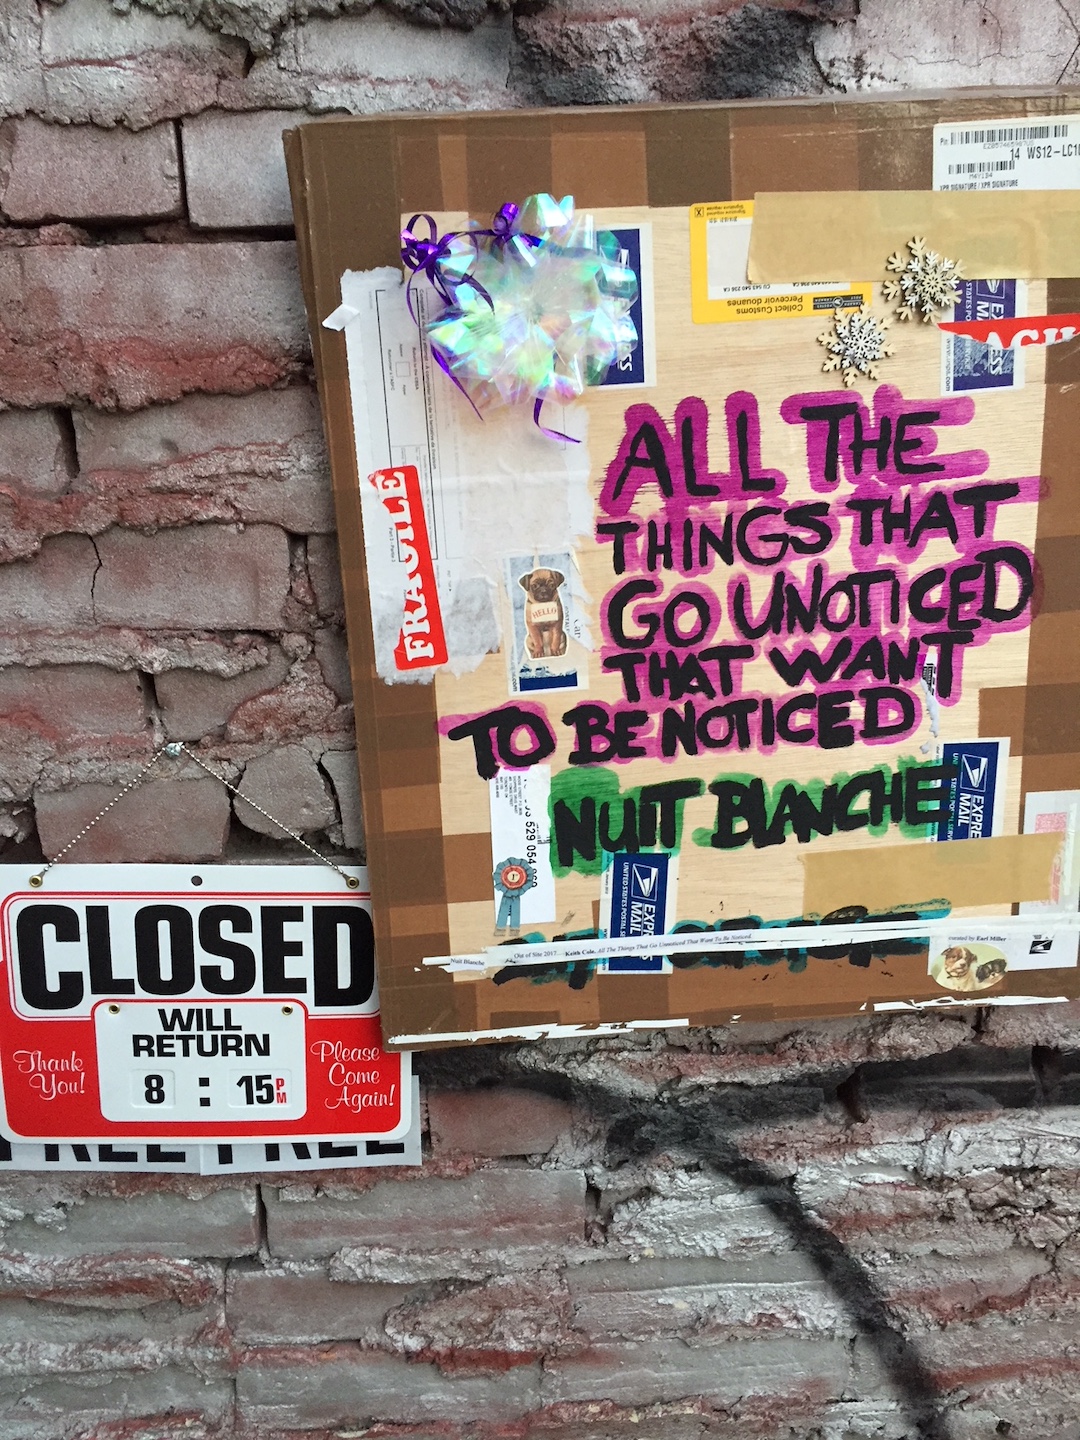 Art installation on a brick wall that reads "closed" and "all the things that go unnoticed that want to be noticed, nuit blanche"